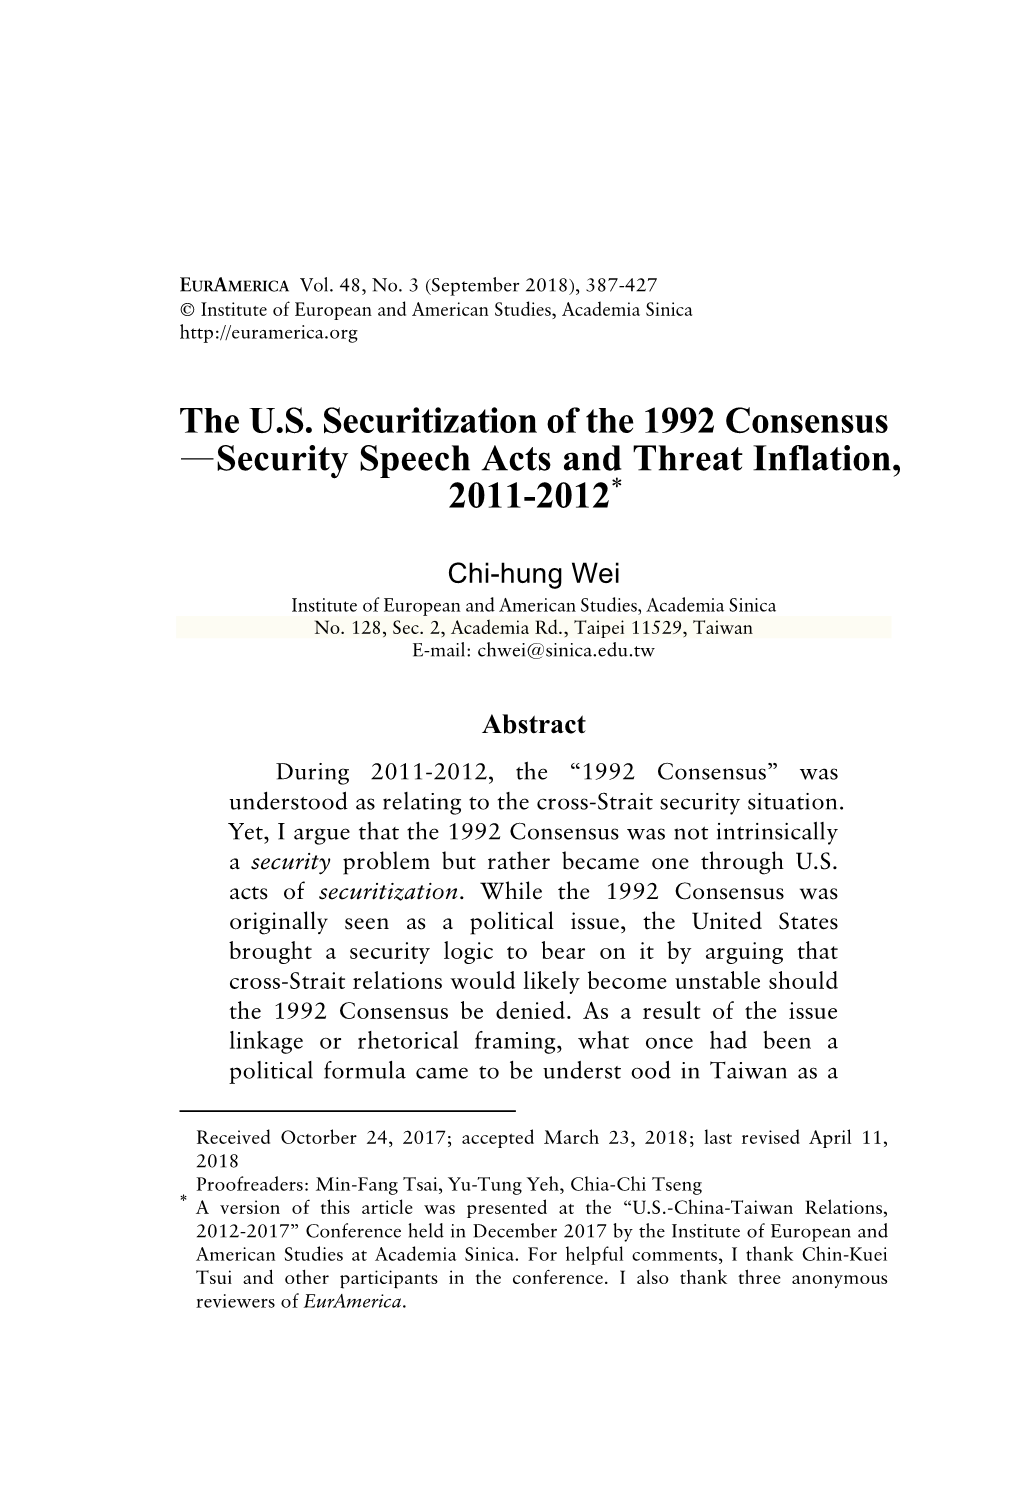 The U.S. Securitization of the 1992 Consensus—Security Speech Acts